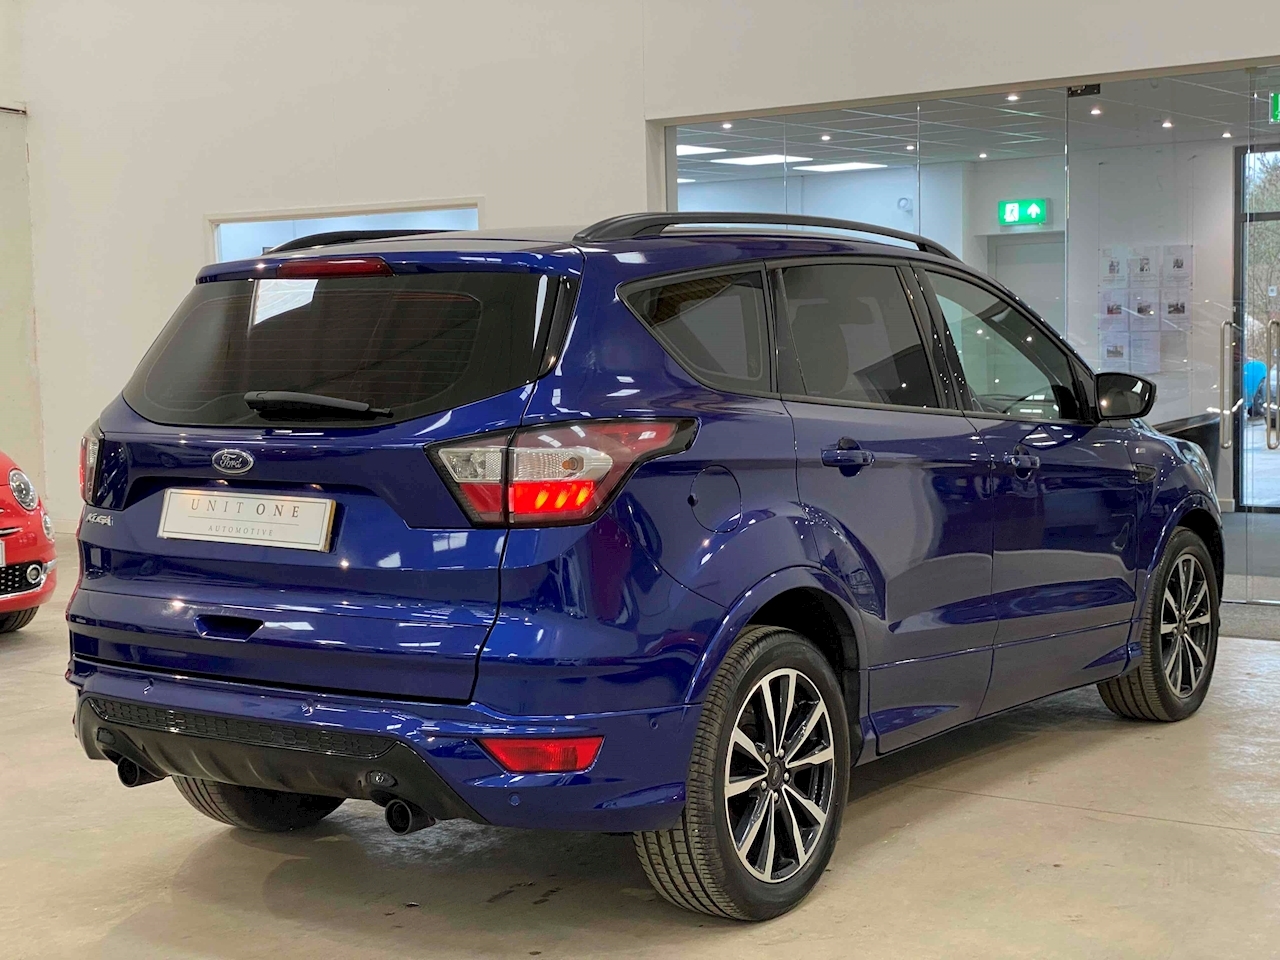 2.0 TDCi EcoBlue ST-Line SUV 5dr Diesel Manual (s/s) (150 ps)